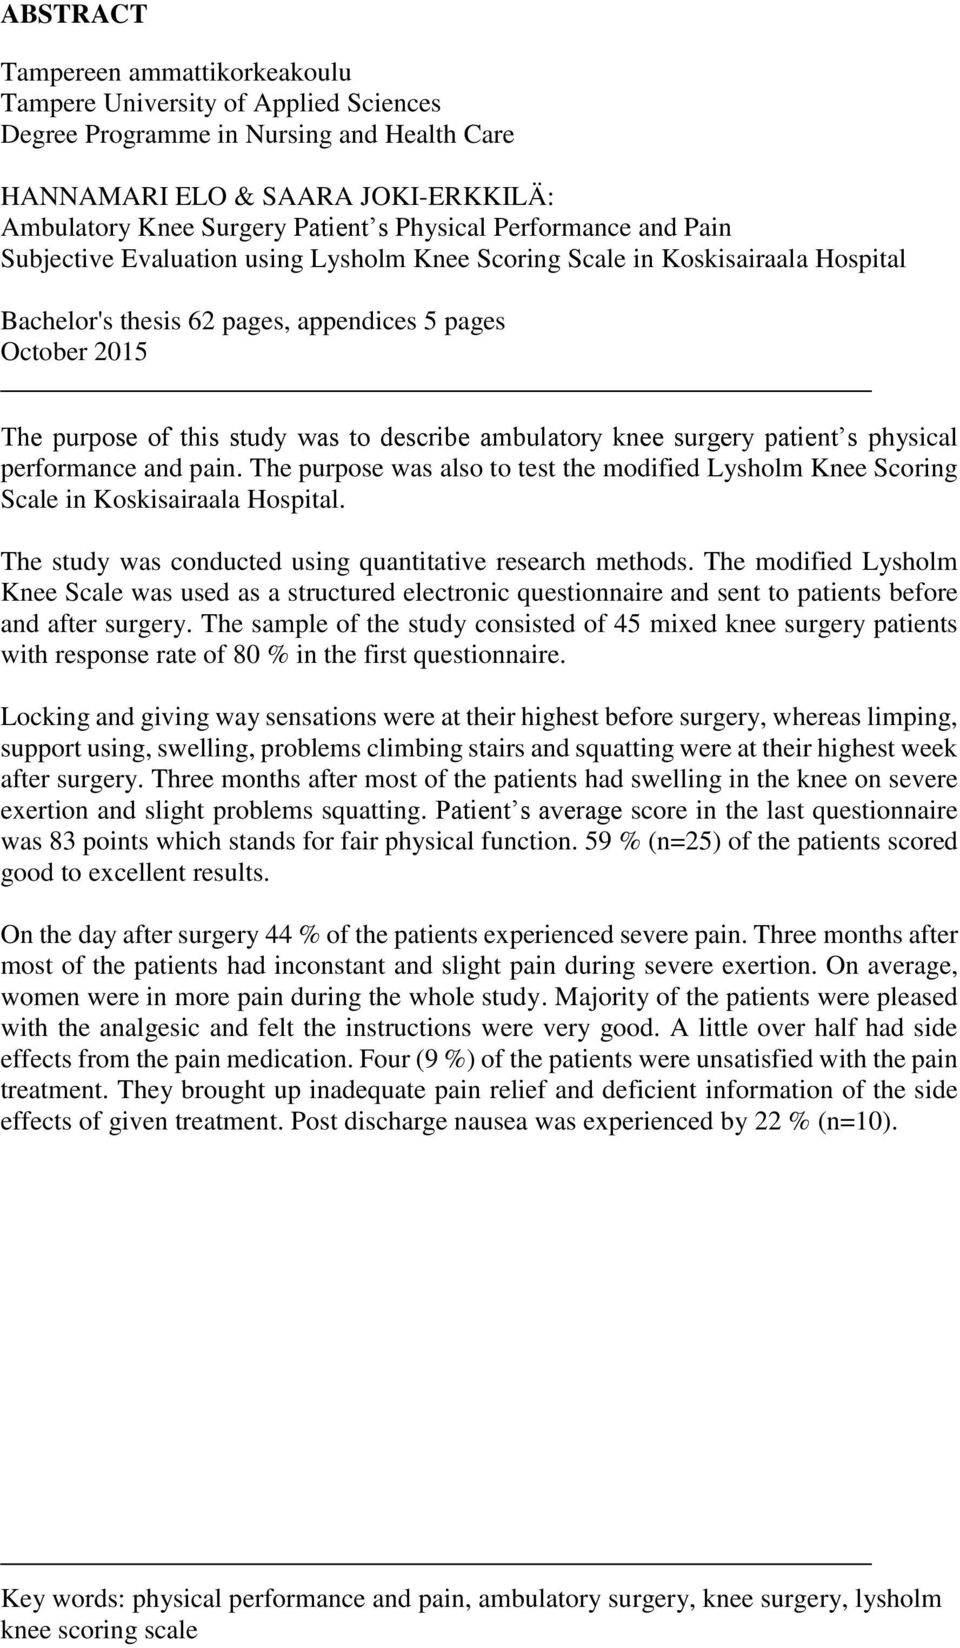 describe ambulatory knee surgery patient s physical performance and pain. The purpose was also to test the modified Lysholm Knee Scoring Scale in Koskisairaala Hospital.